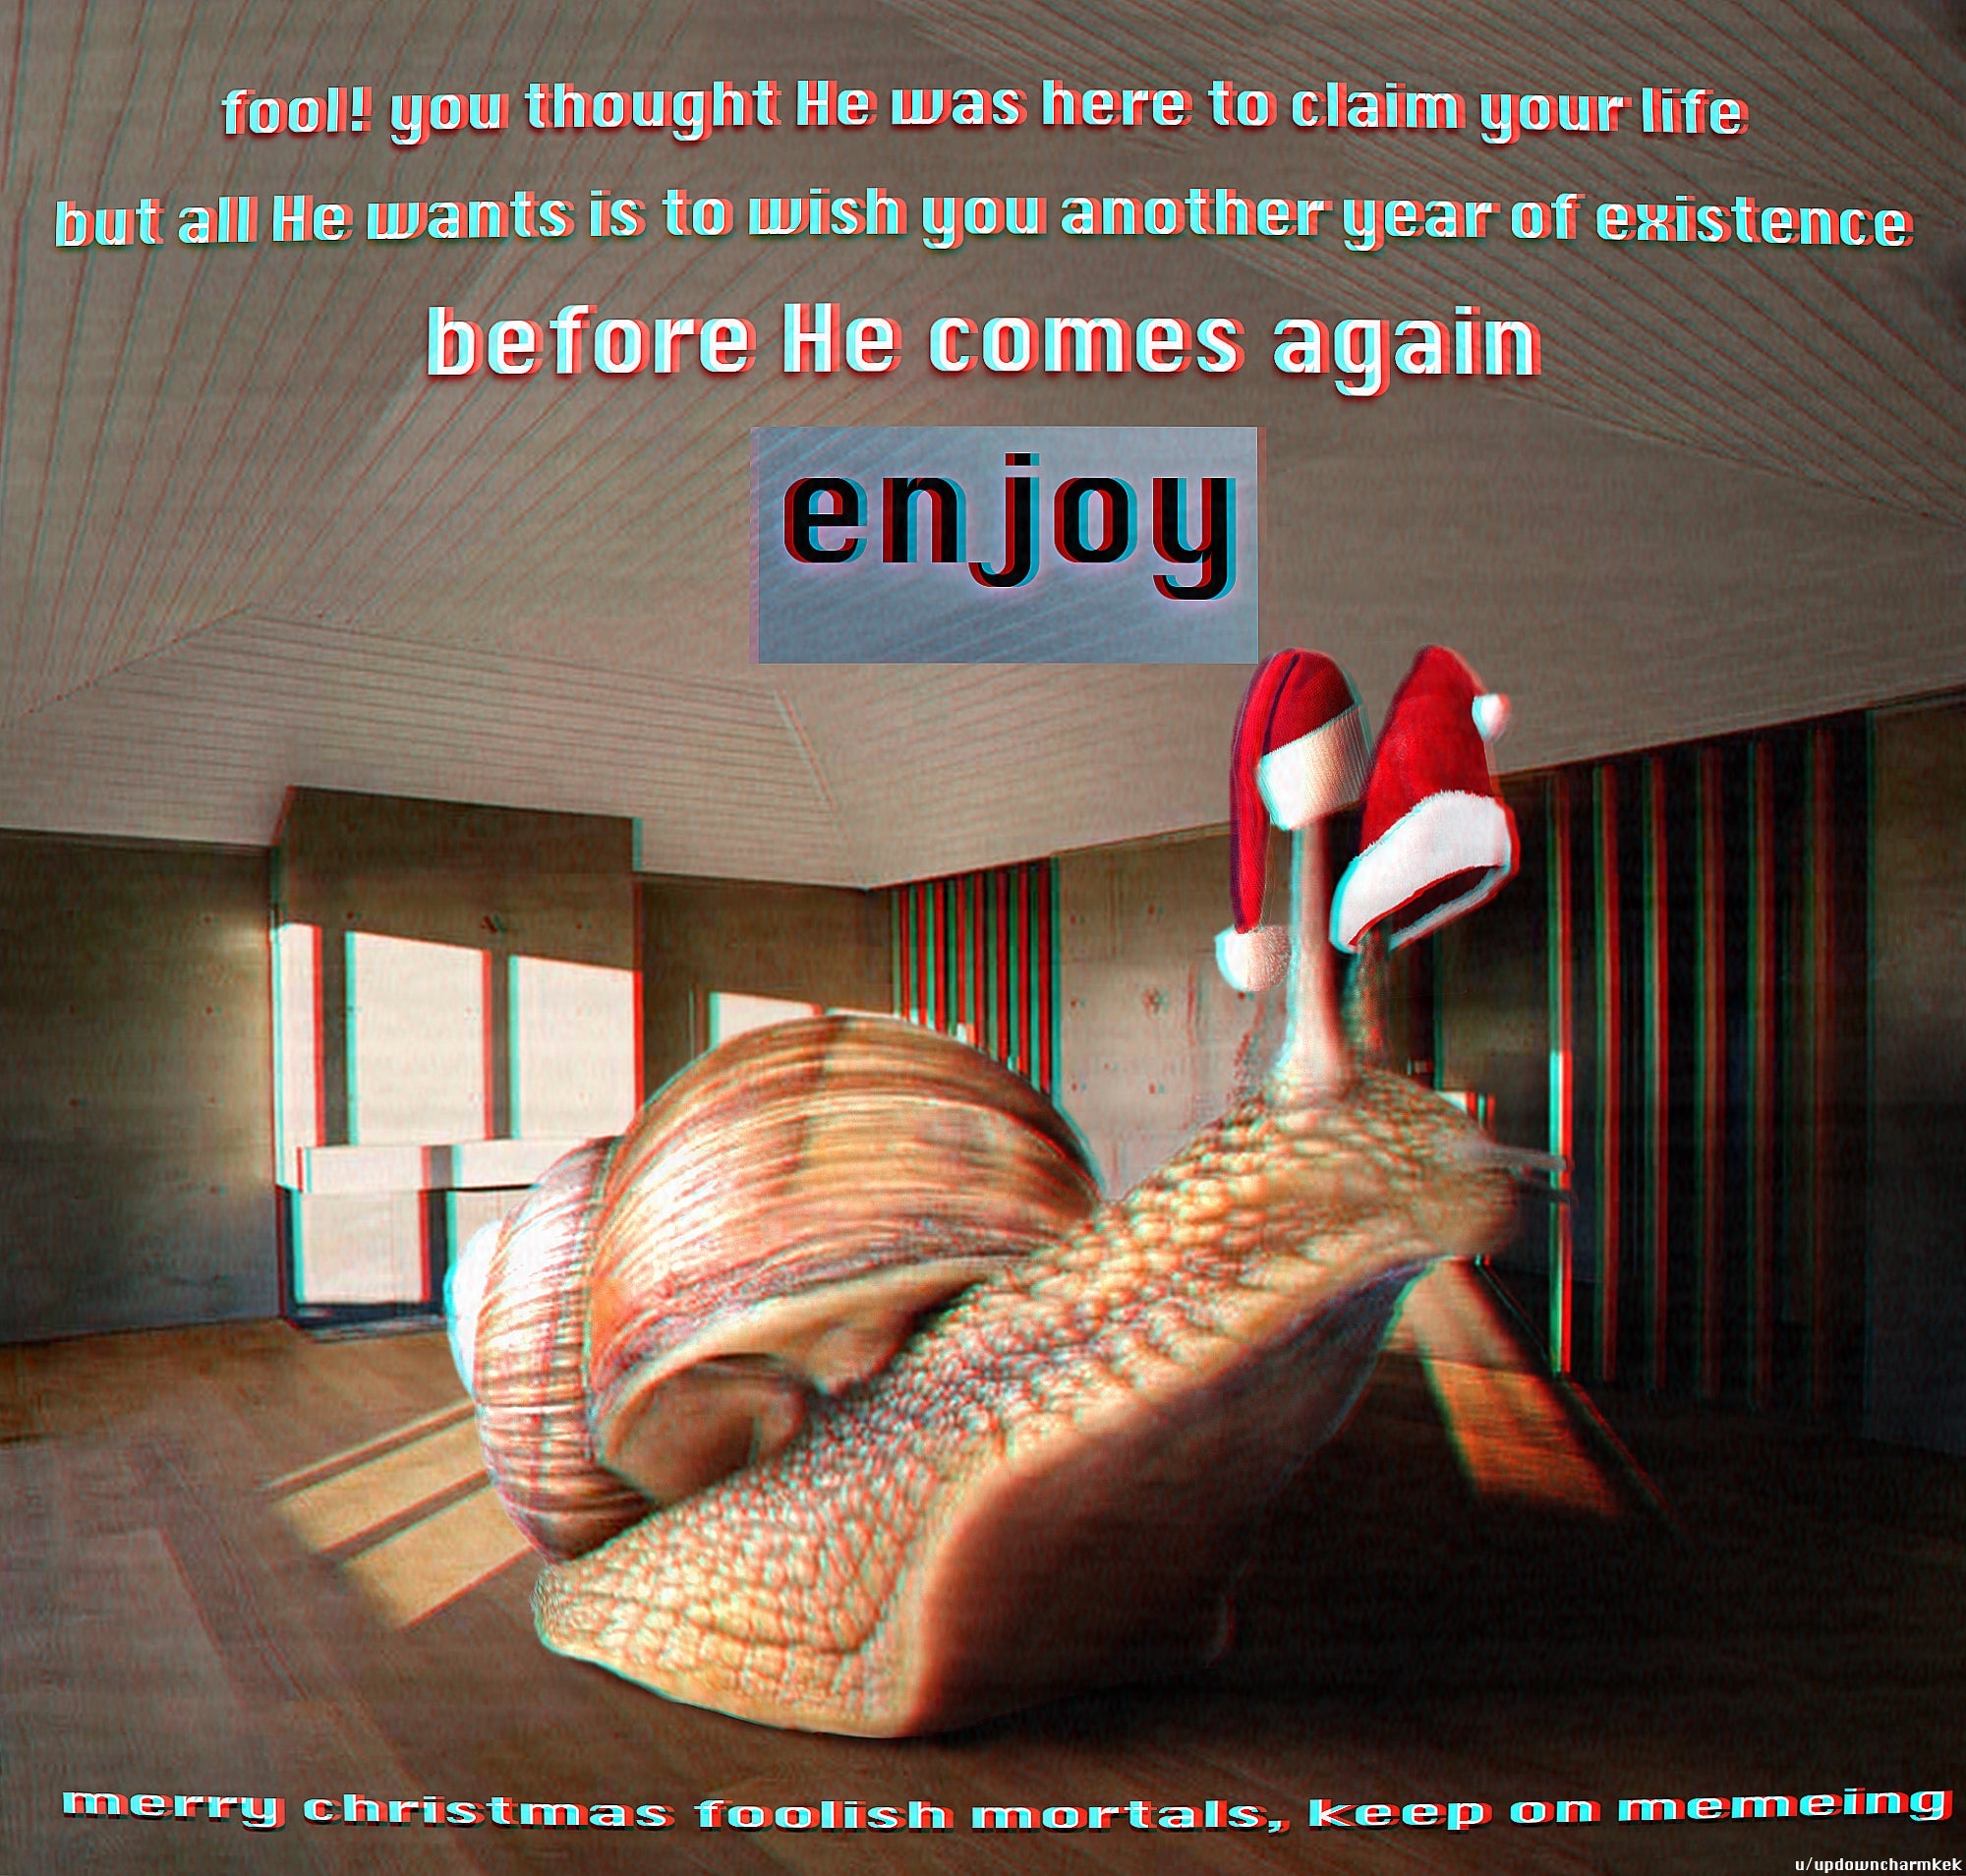 merry christmas surreal meme - faold you thought He was here to claim your life but all He wants is to wish you another year of existence before He comes again enjoy merry christmas foolish mortals, keep on memeing